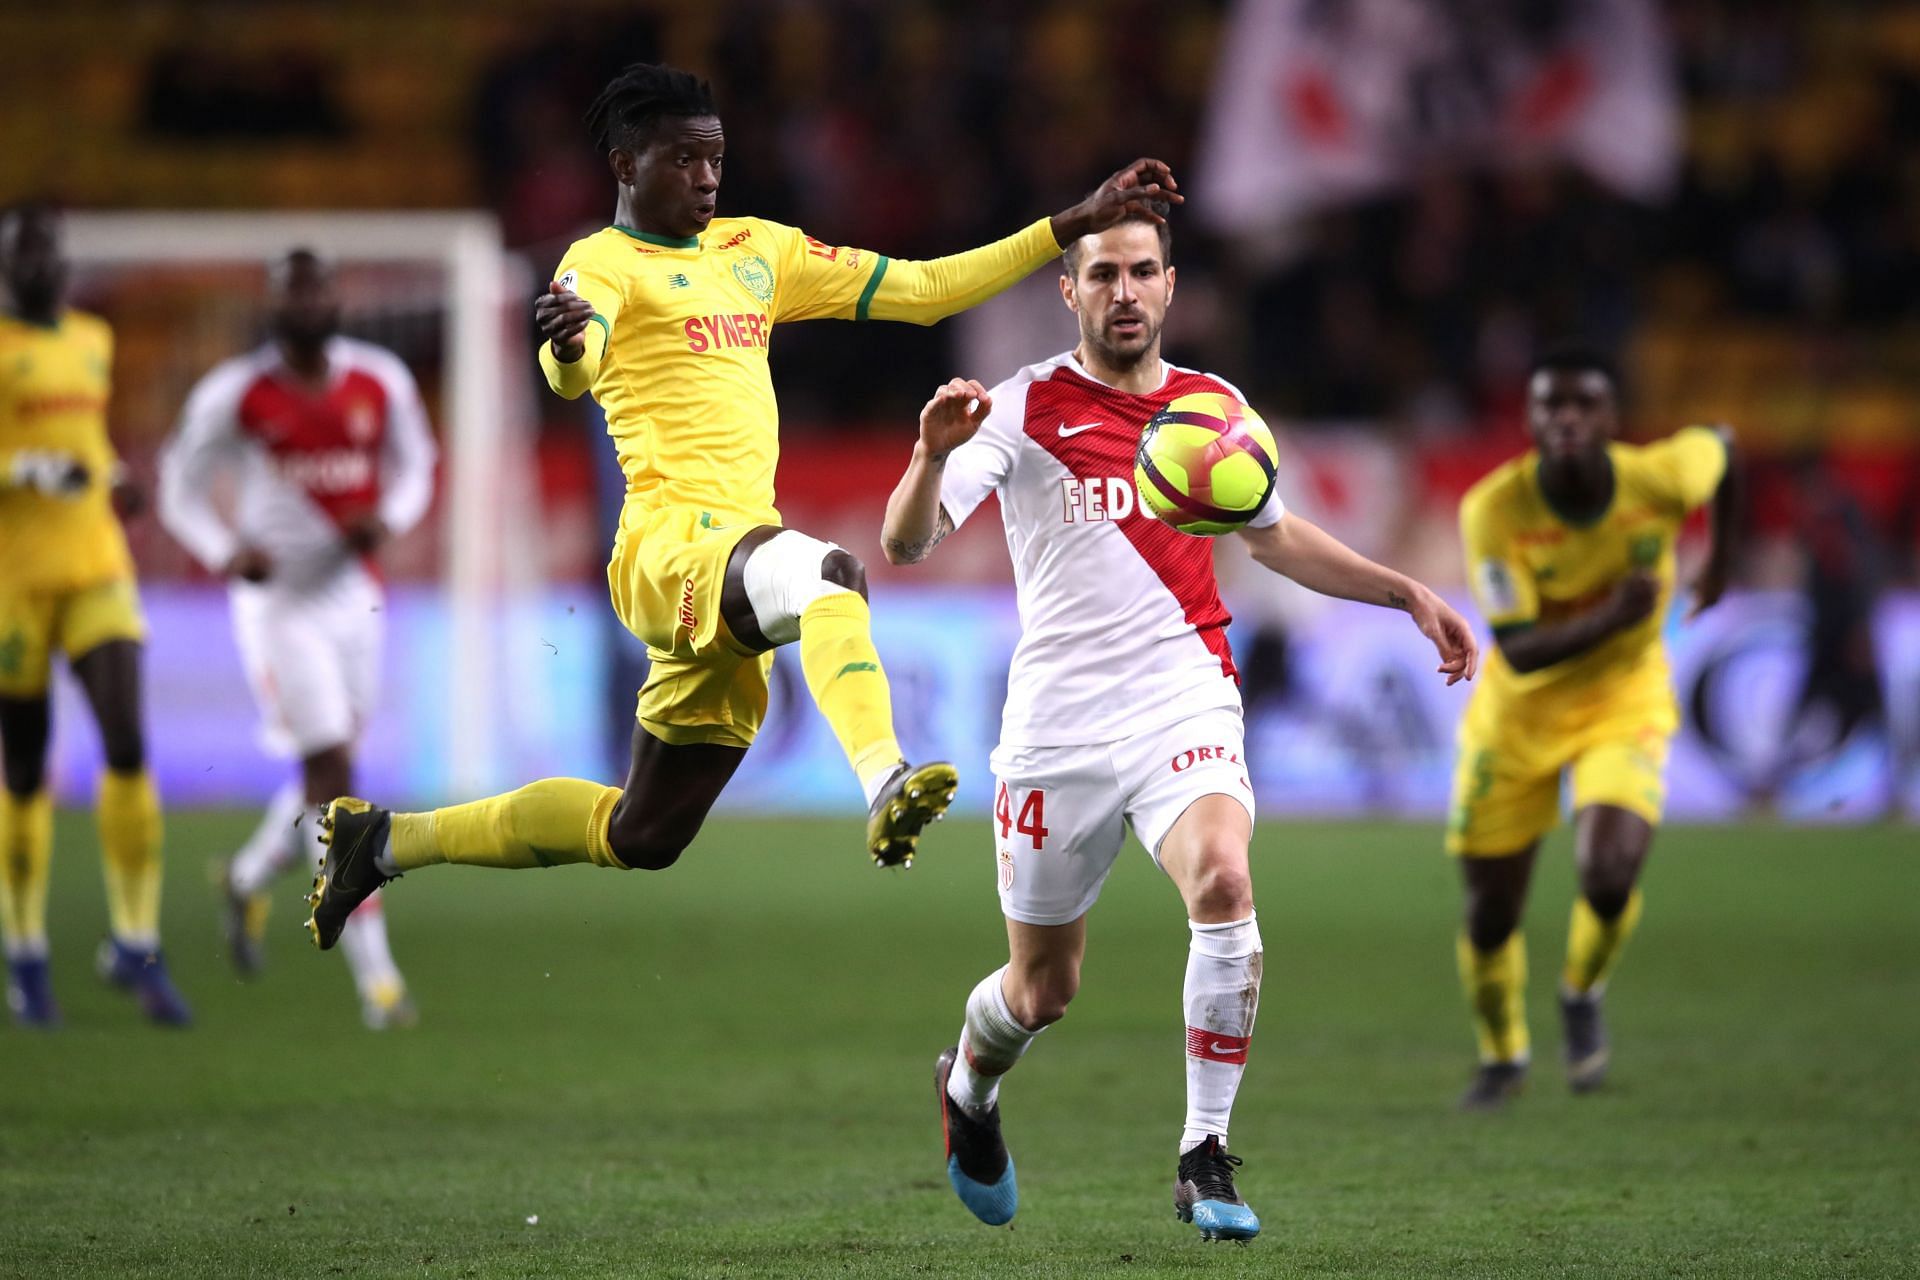 Fabregas will be a huge miss for Monaco